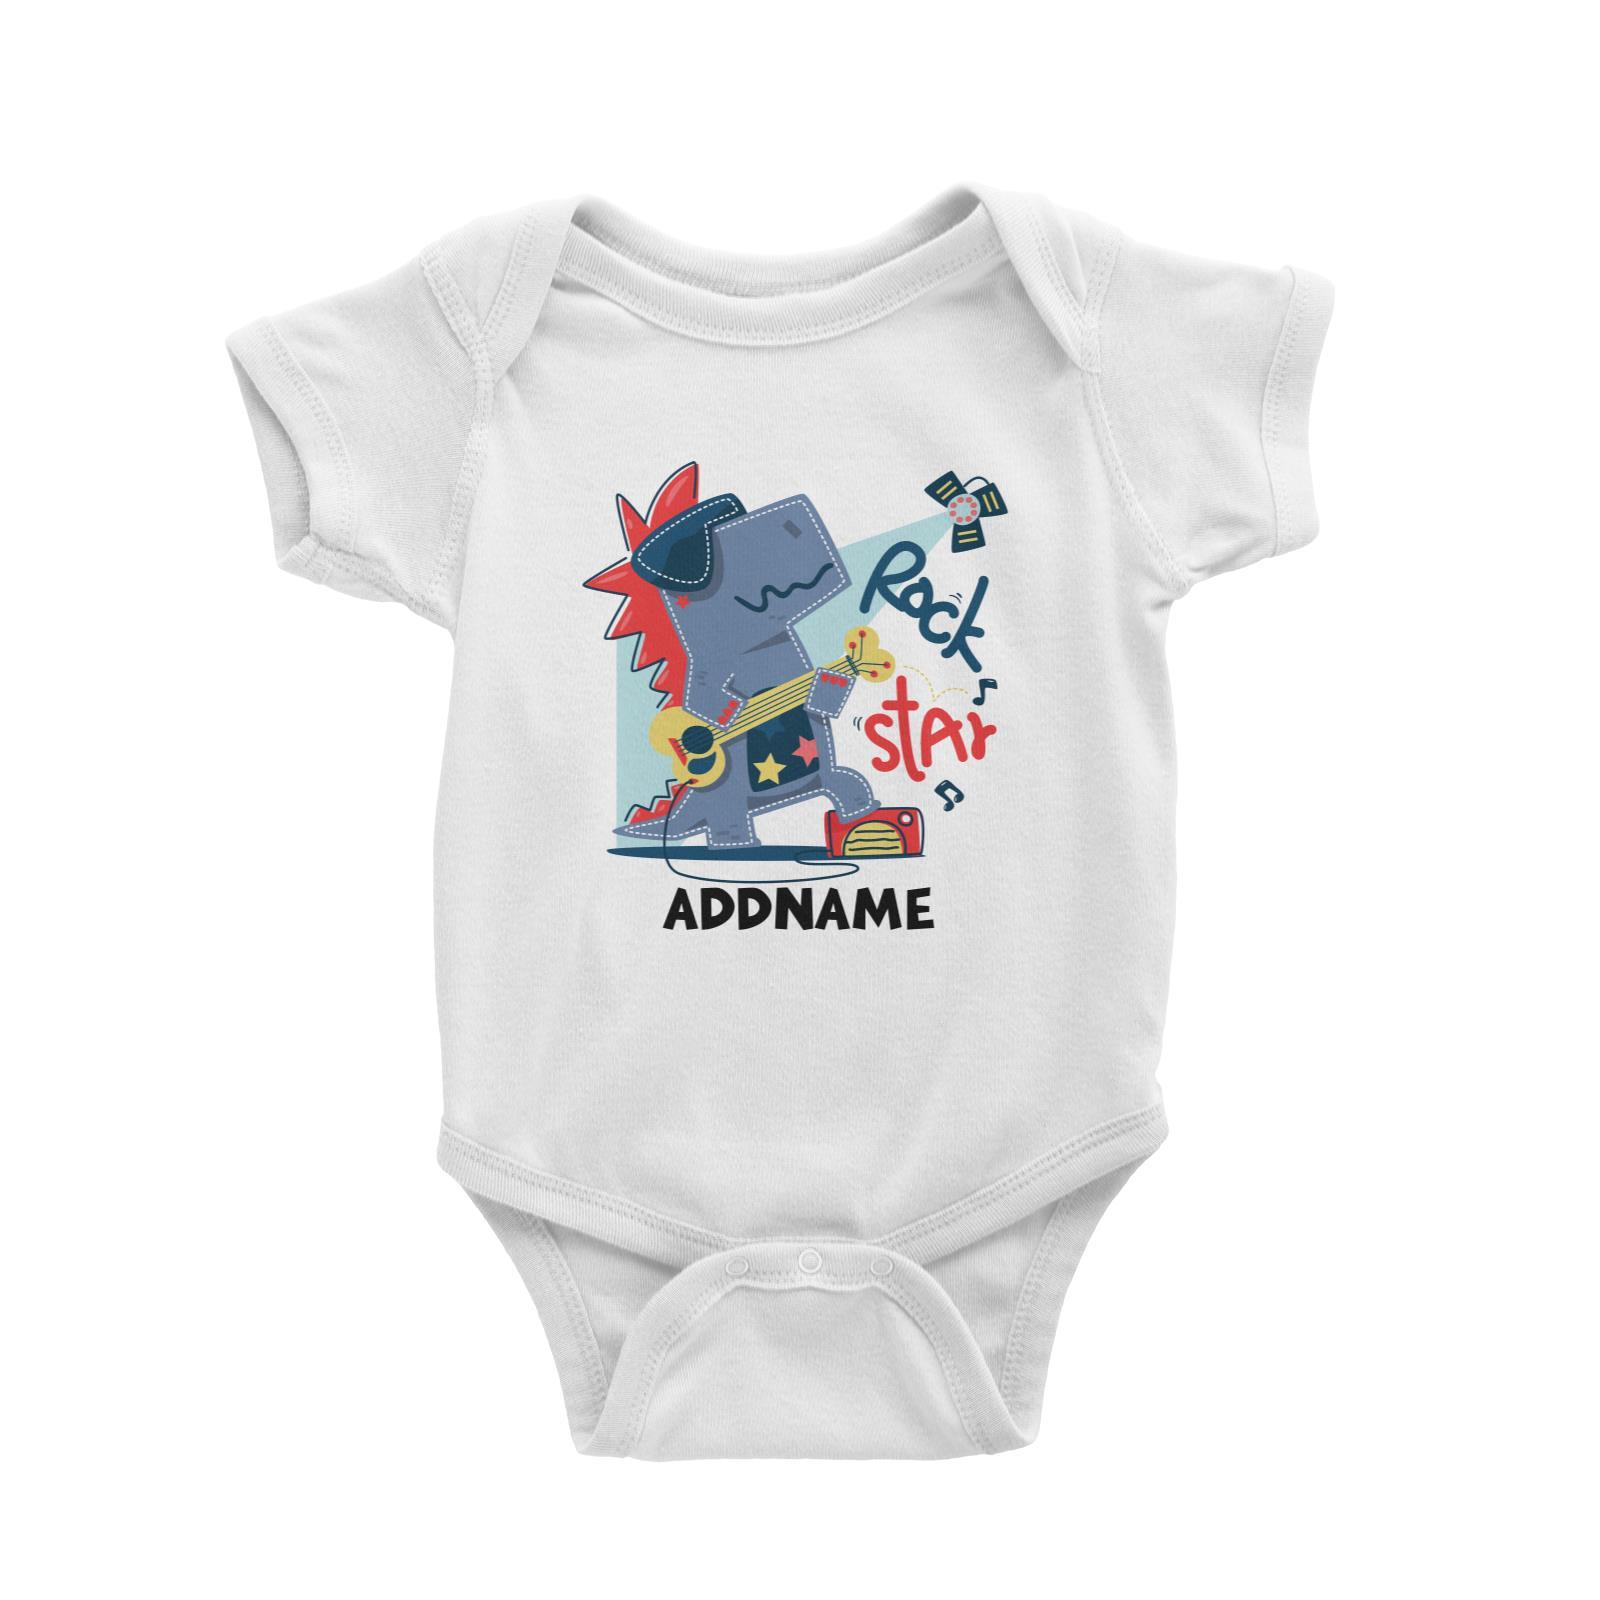 Rock Star Dinosaur with Guitar Addname Baby Romper